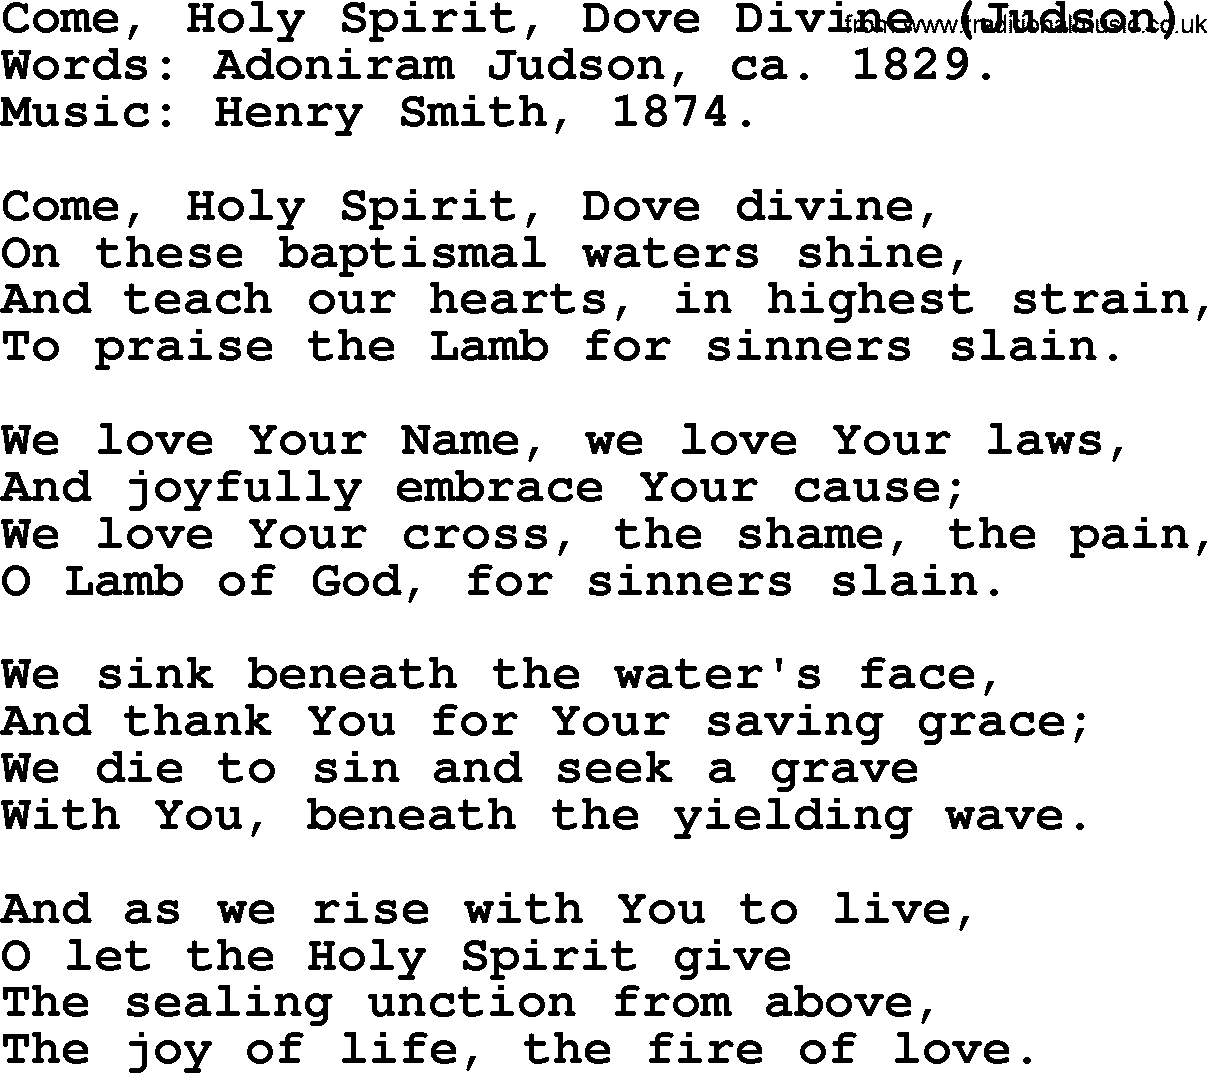 Baptism and Christening Hymns and Songs, Hymn: Come, Holy Spirit, Dove Divine (Judson), lyrics and PDF